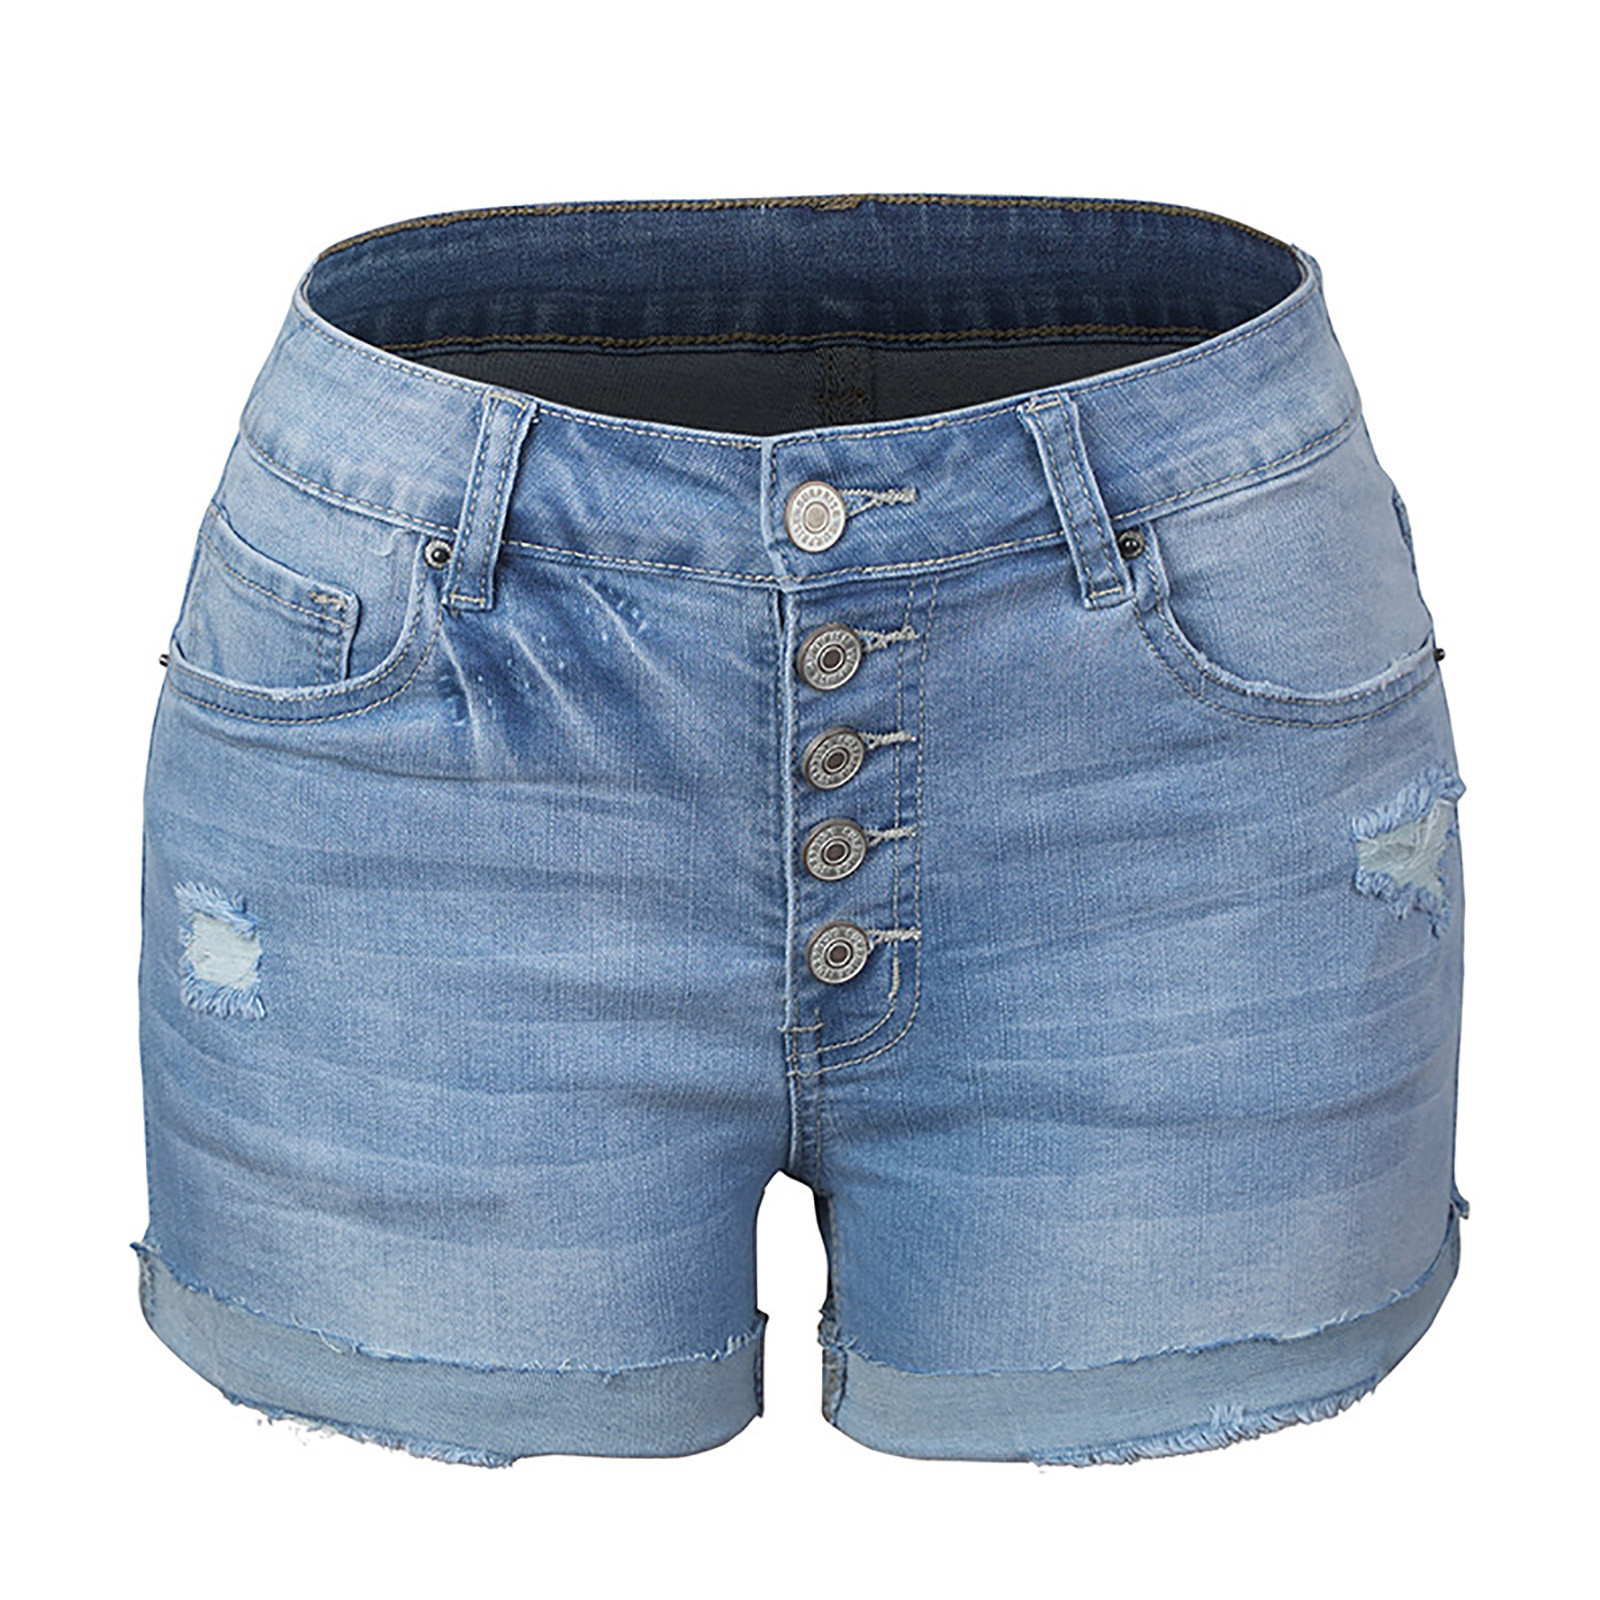 Jeans Shorts for Women Sexy Casual Stretchy Denim Shorts Mid Rise ...